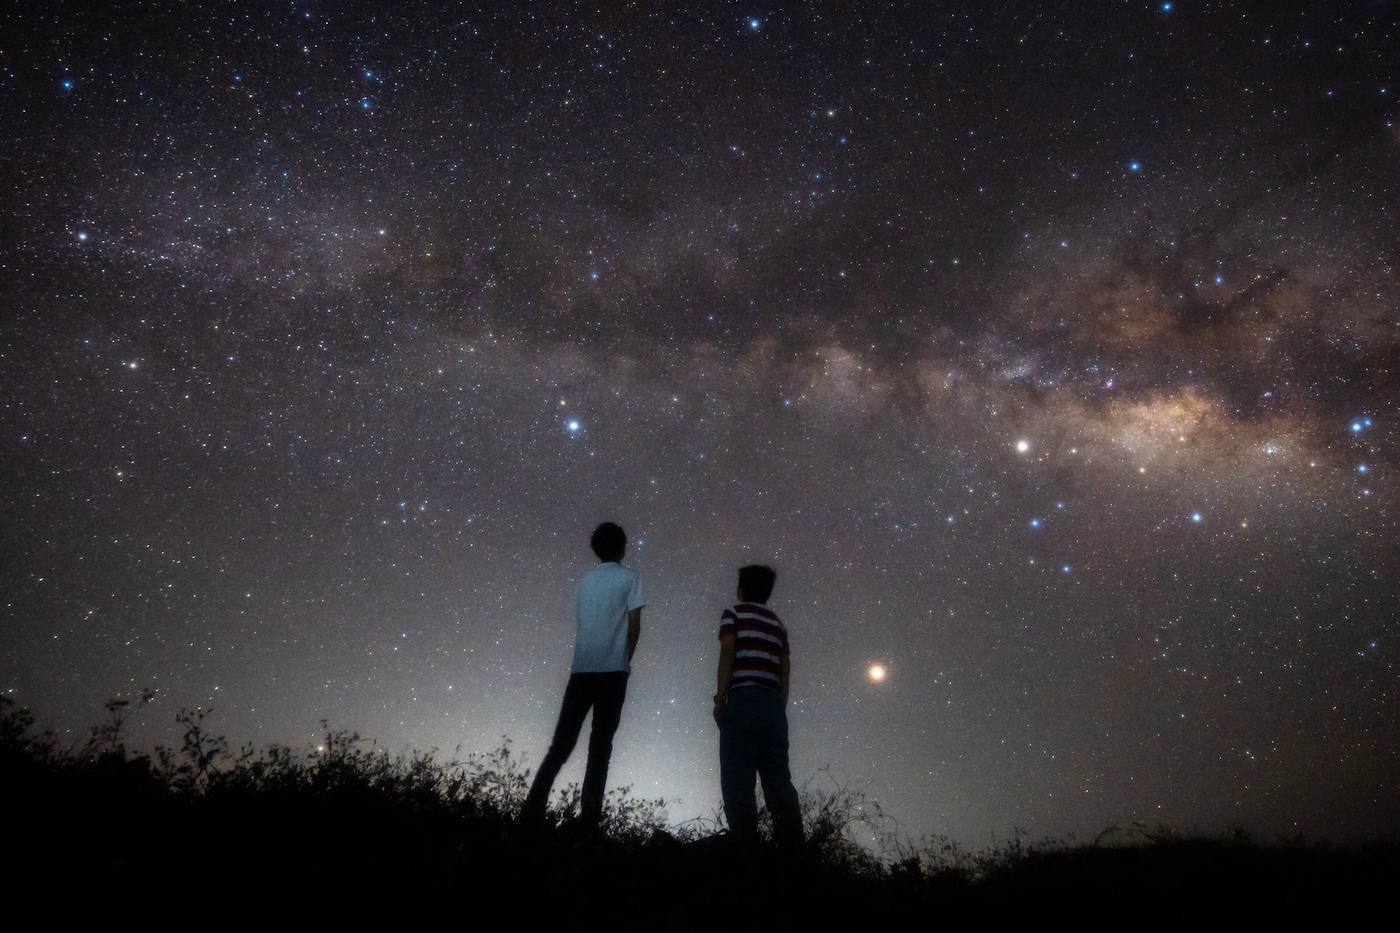 Here's the place to enjoy starry skies in Okinawa! Japan's first 'Dark Sky Park' is full of charm